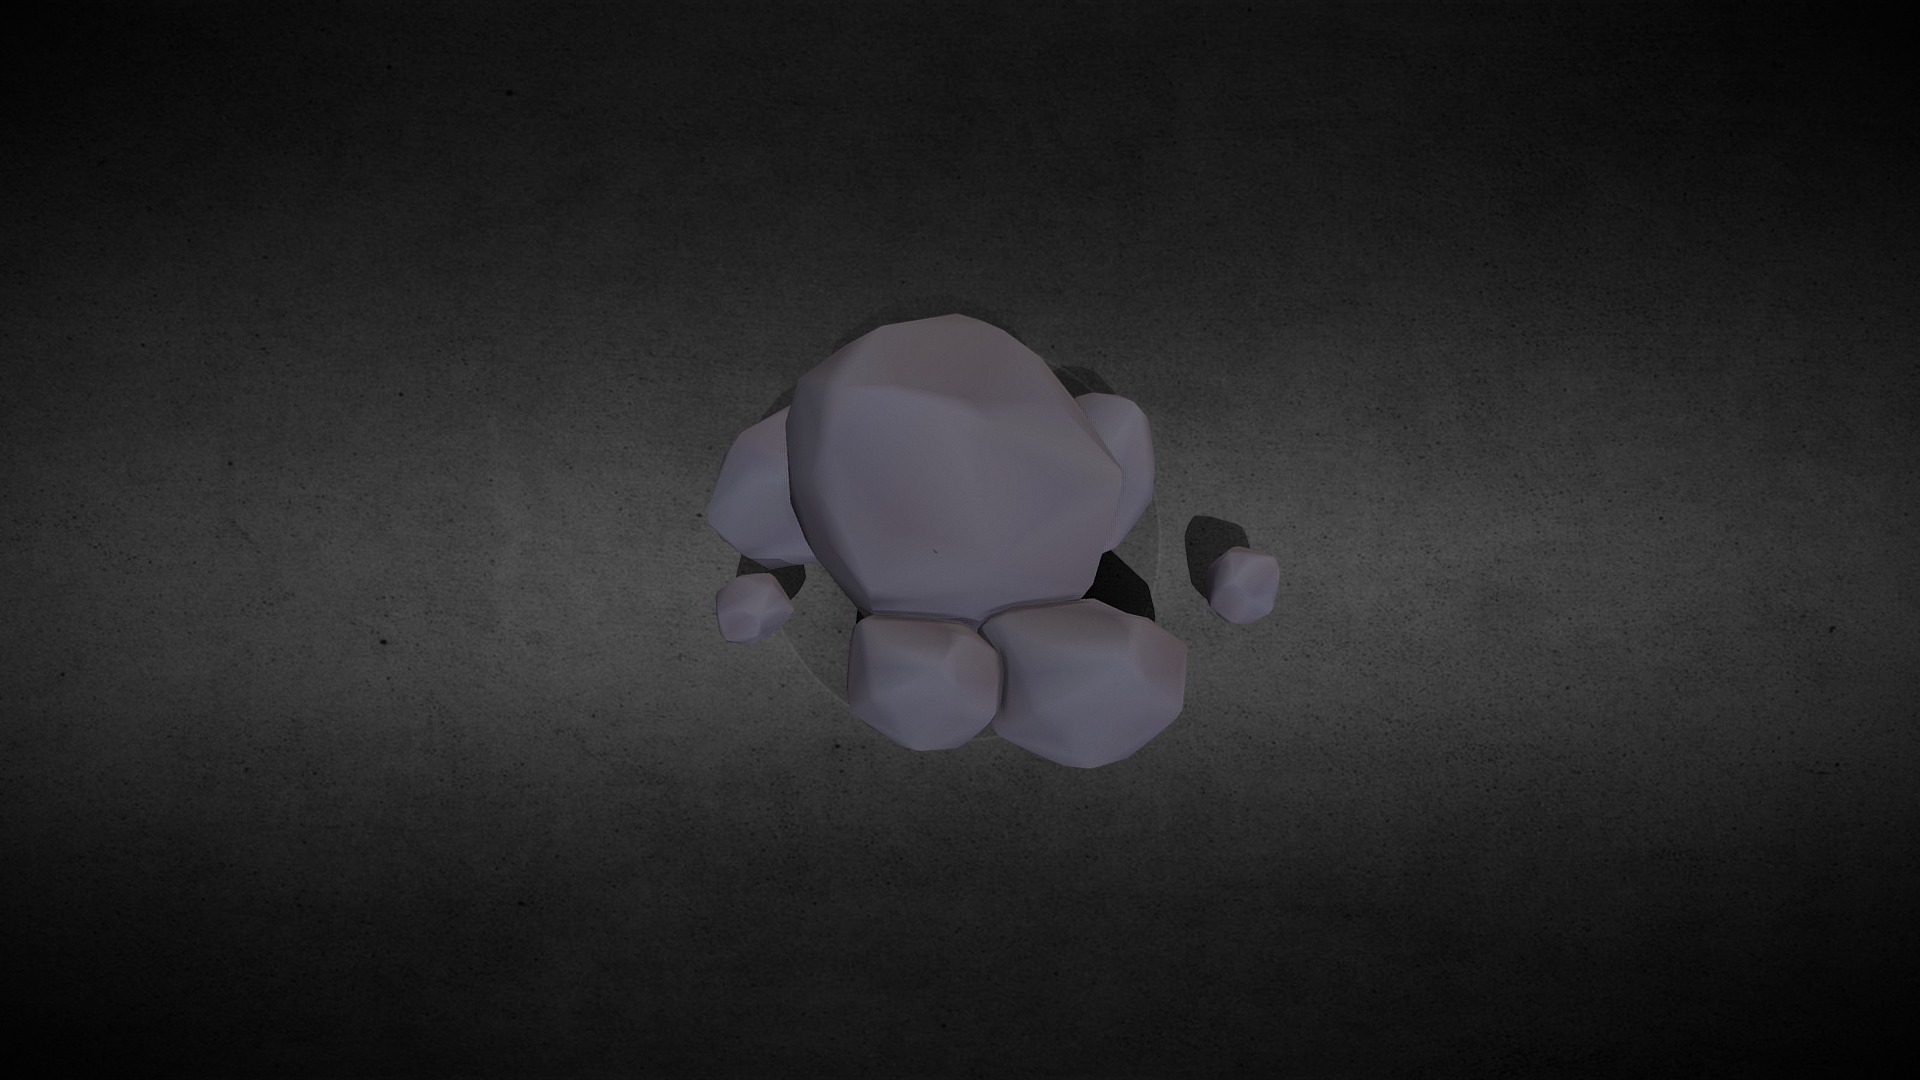 3D model LowPoly Rock - This is a 3D model of the LowPoly Rock. The 3D model is about a white toy on a black surface.